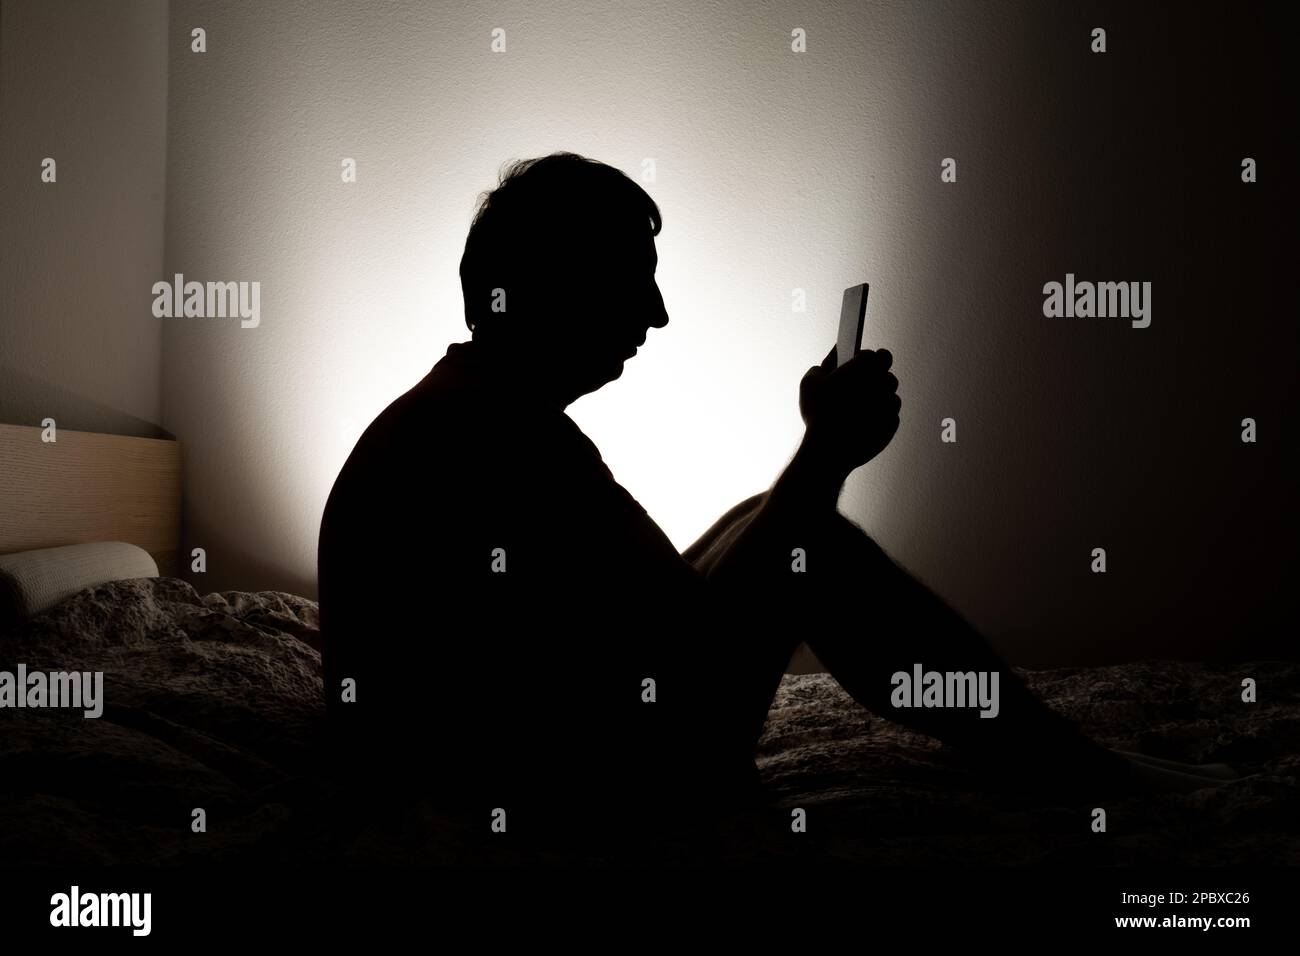 Male silhouette depicting loneliness or depression sitting in his apartment bed, looking at social media on his phone. Stock Photo